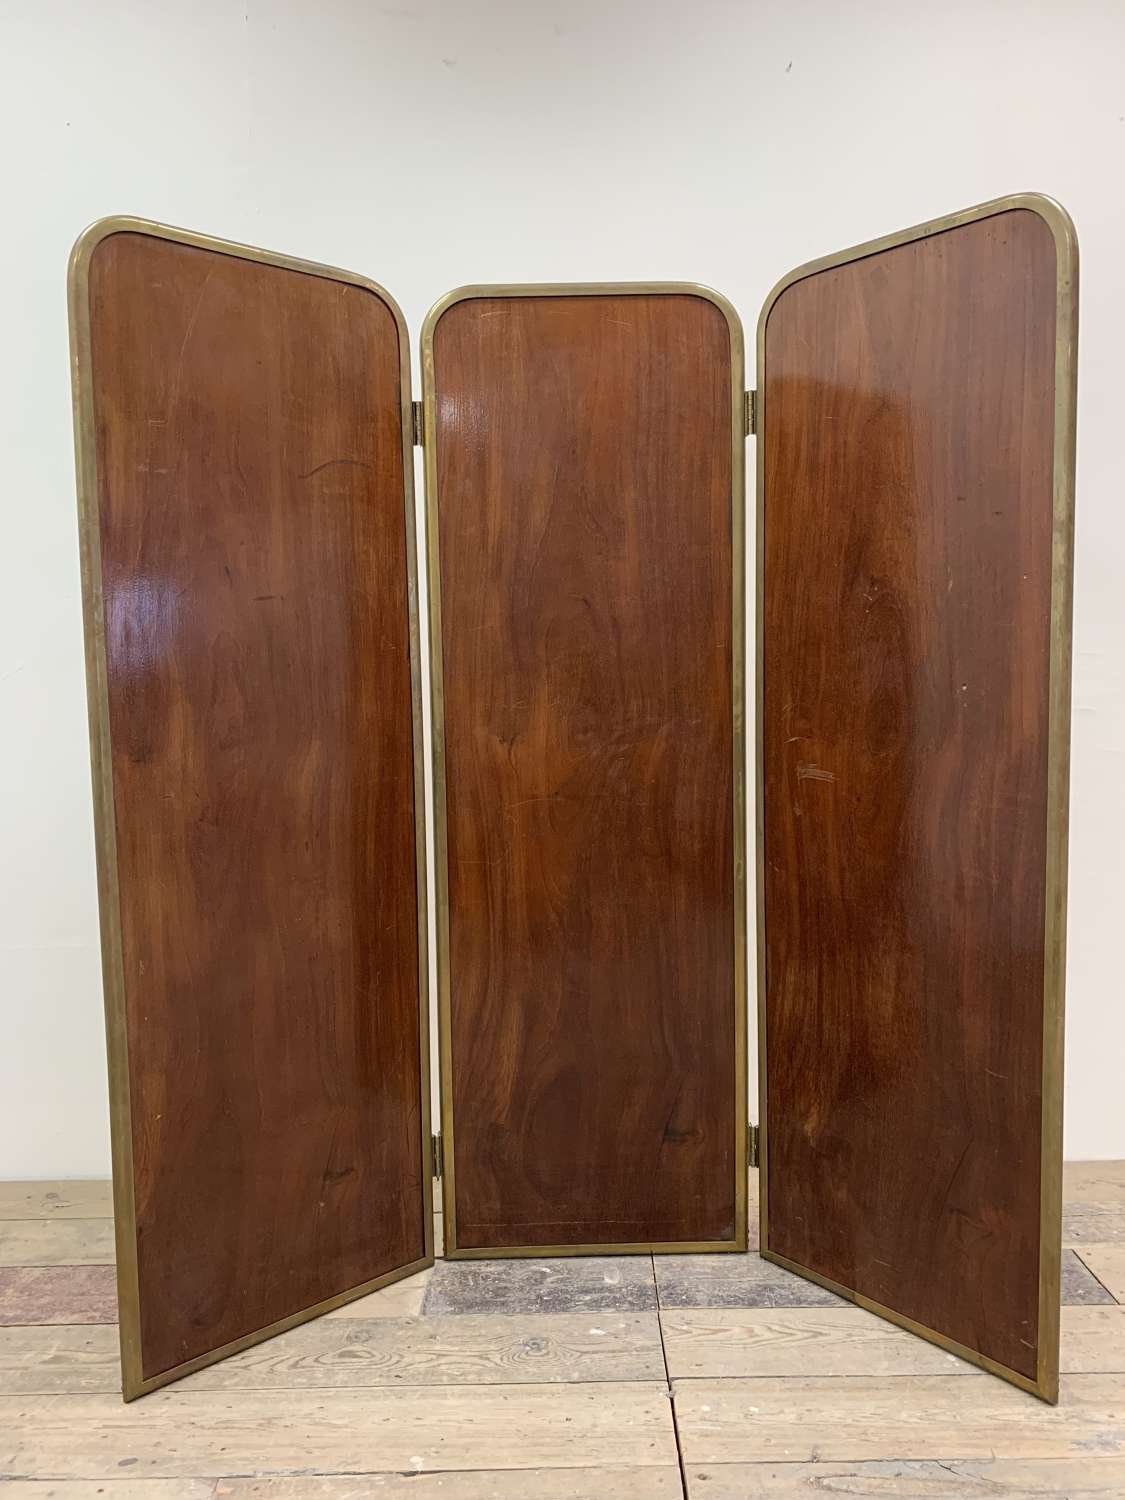 1930s three double sided fold brass bound screen